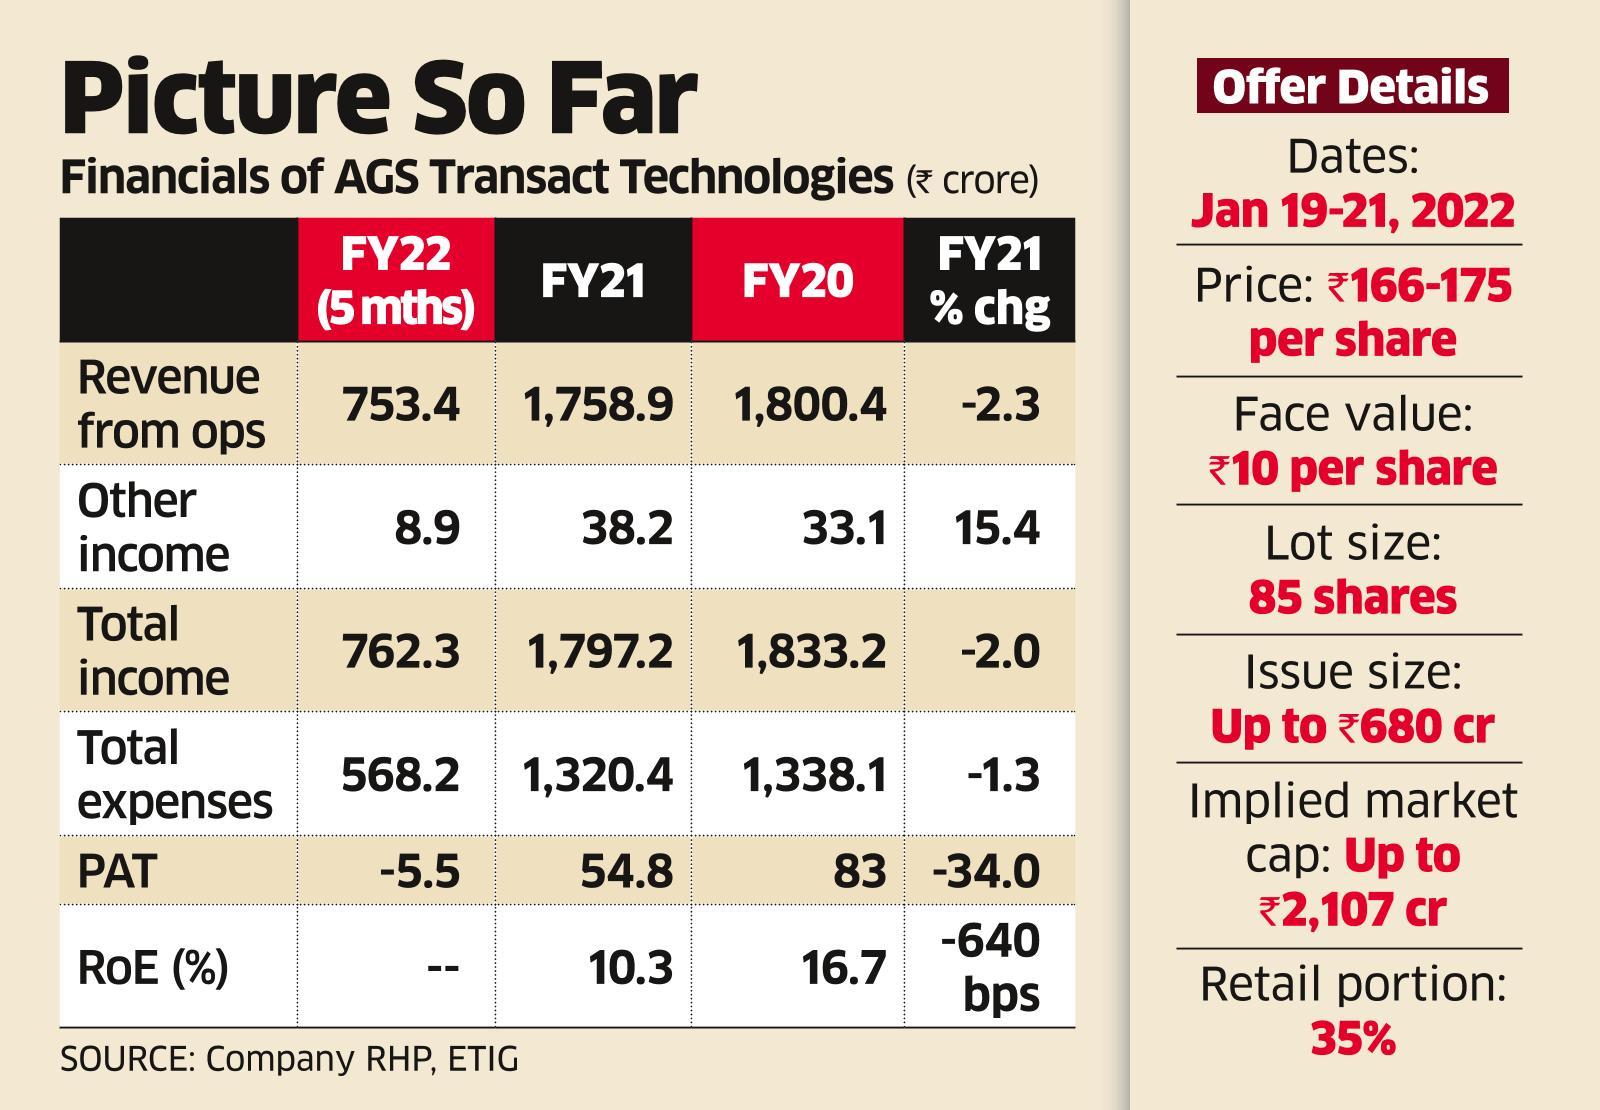 Risk-averse Investors May Wait for Clear Growth Trend in AGS